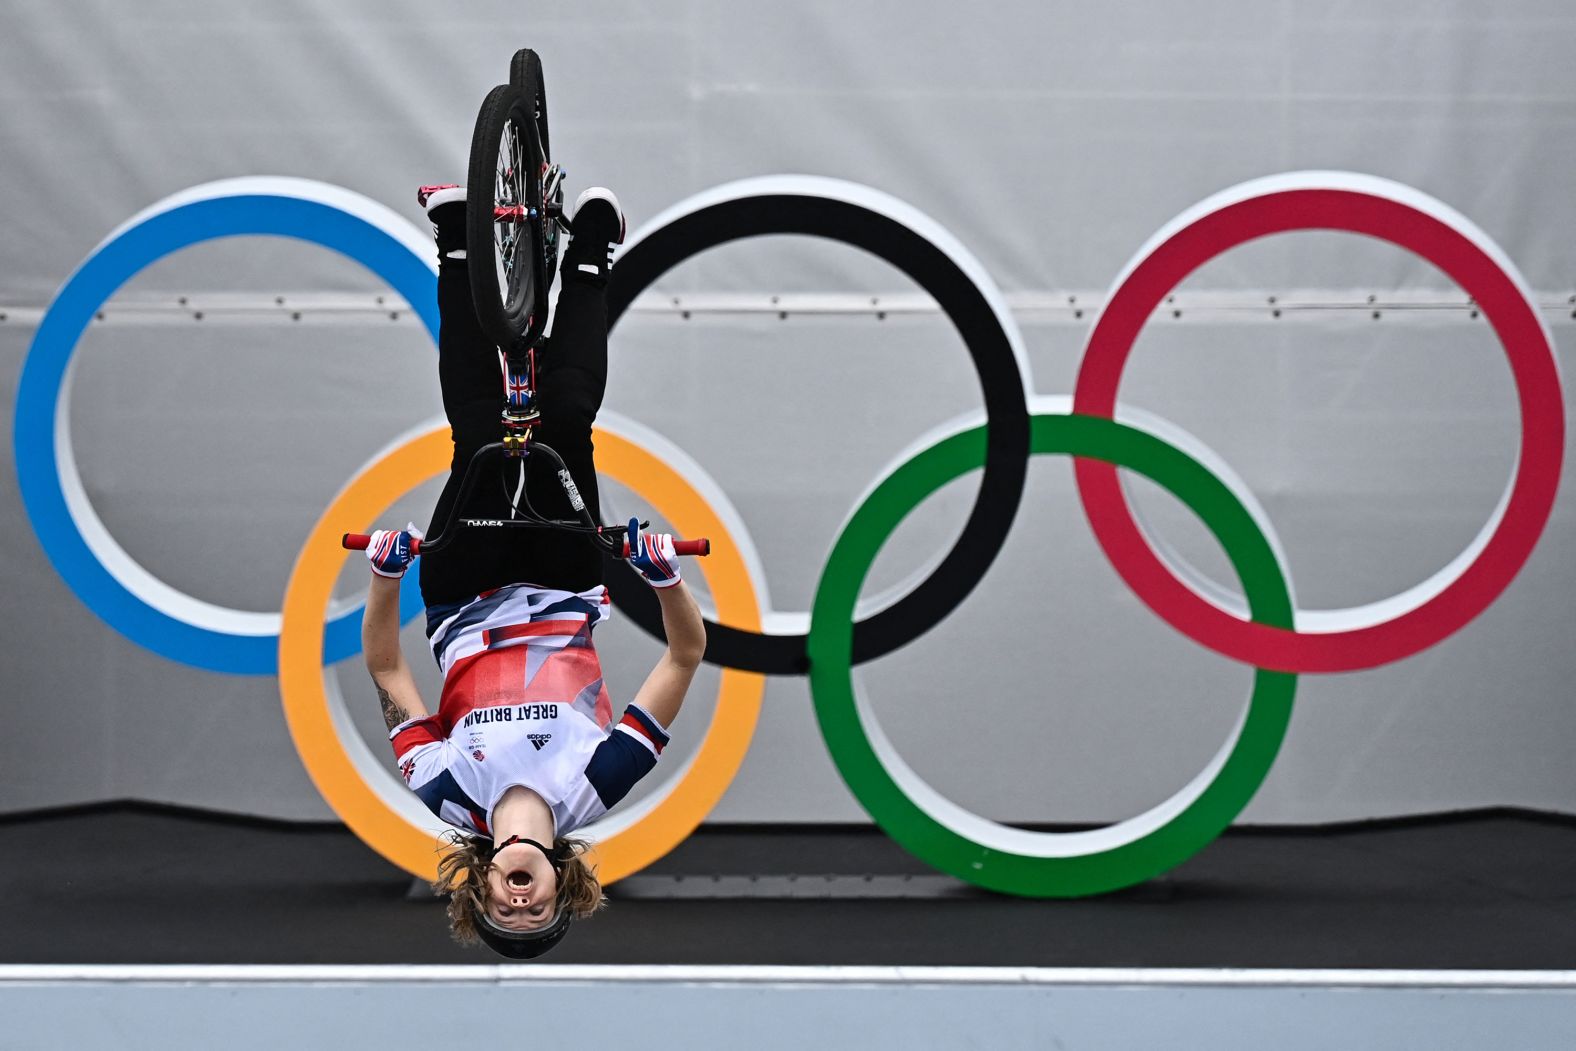 Great Britain's Charlotte Worthington competes in BMX freestyle on July 31. <a href="index.php?page=&url=https%3A%2F%2Fwww.cnn.com%2Fworld%2Flive-news%2Ftokyo-2020-olympics-08-01-21-spt%2Fh_eb8e9933ba3a3896d7a5f838985b580e" target="_blank">She would go on to win gold.</a>